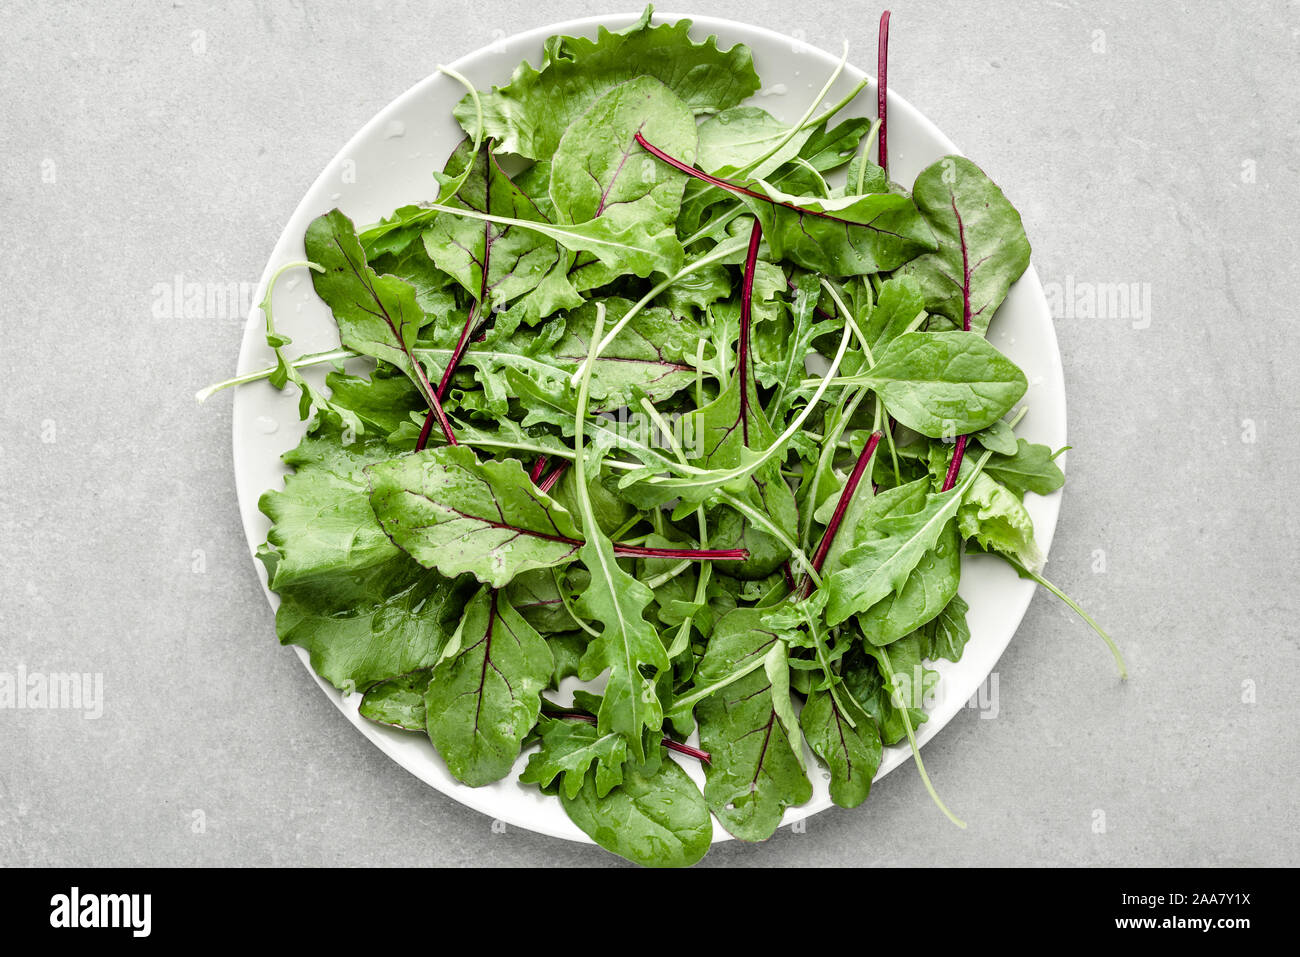 Fresh salad with mix of green leaves of arugula, beets and baby spinach Stock Photo